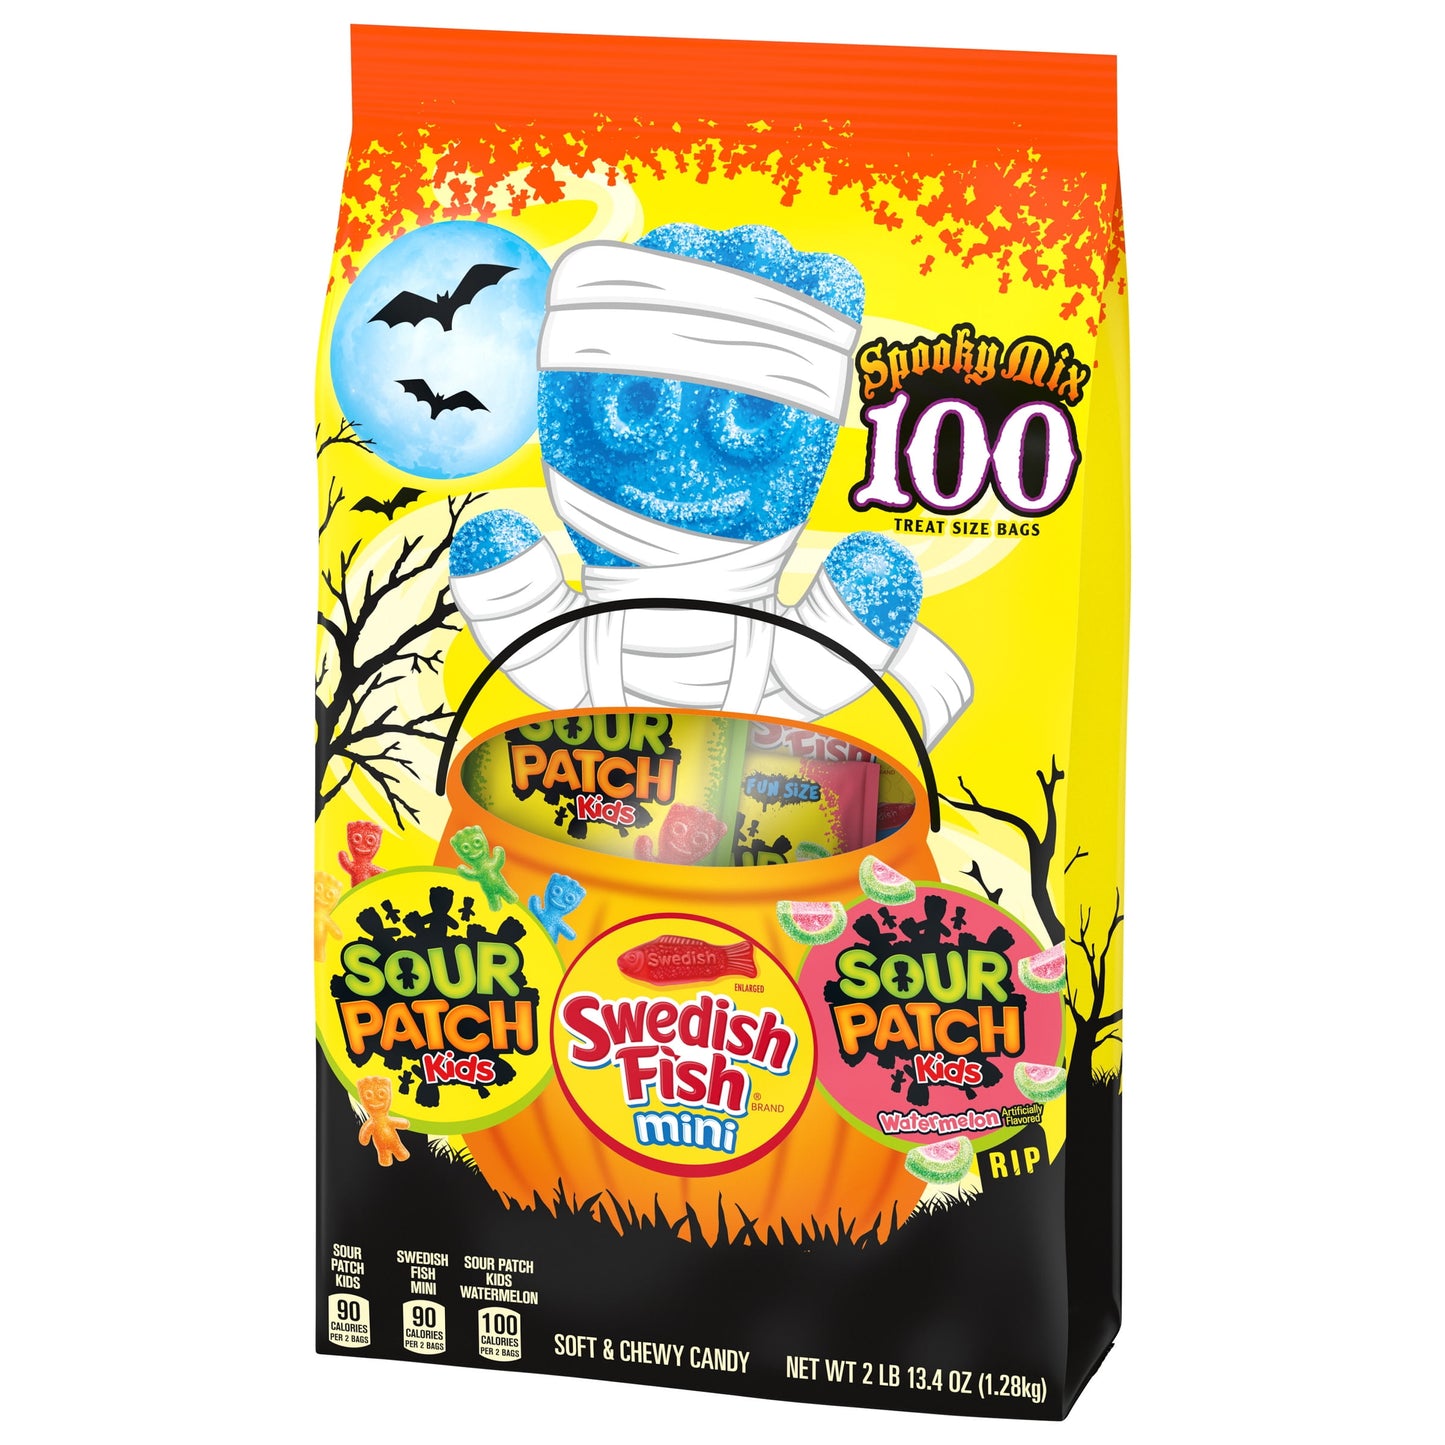 SOUR PATCH KIDS & SWEDISH FISH Mini Halloween Candy Variety Pack, 100 Trick or Treat Bags